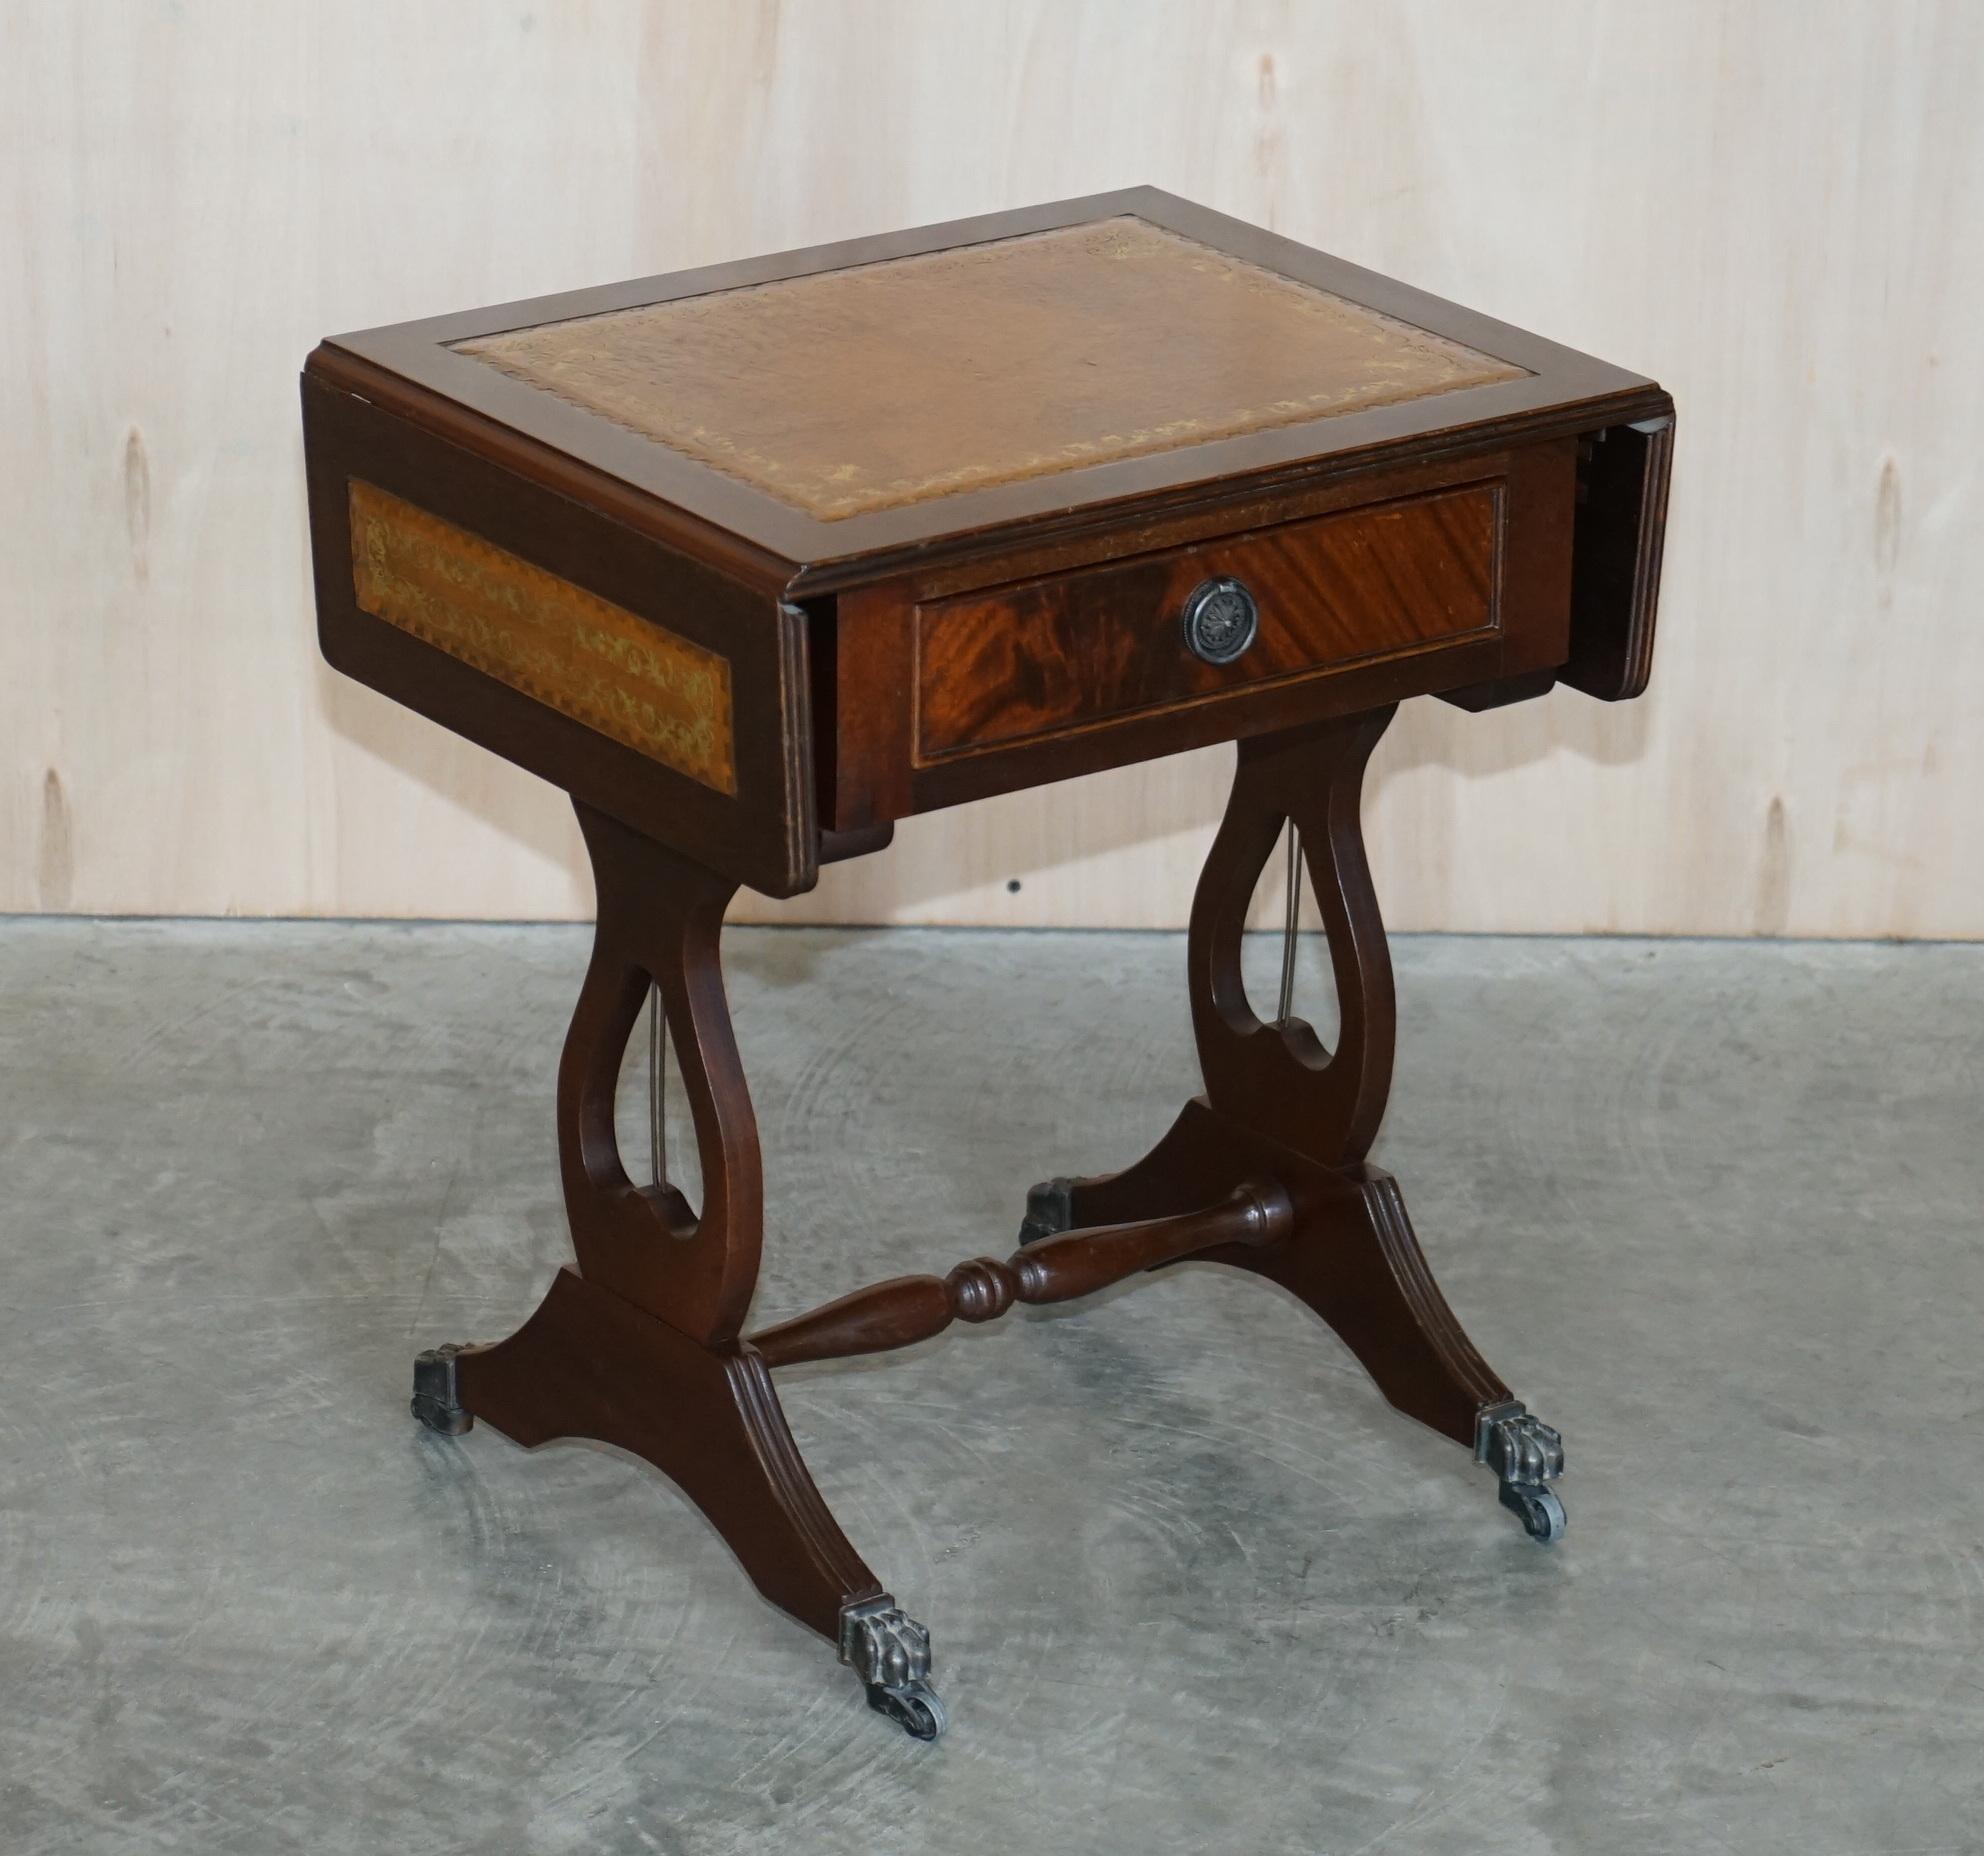 We are delighted to offer for sale this lovely Bevan Funnell vintage Mahogany side table with extending brown leather top and single drawer.

A very good looking and versatile piece, the table has single drawer to the front and false drawer to the